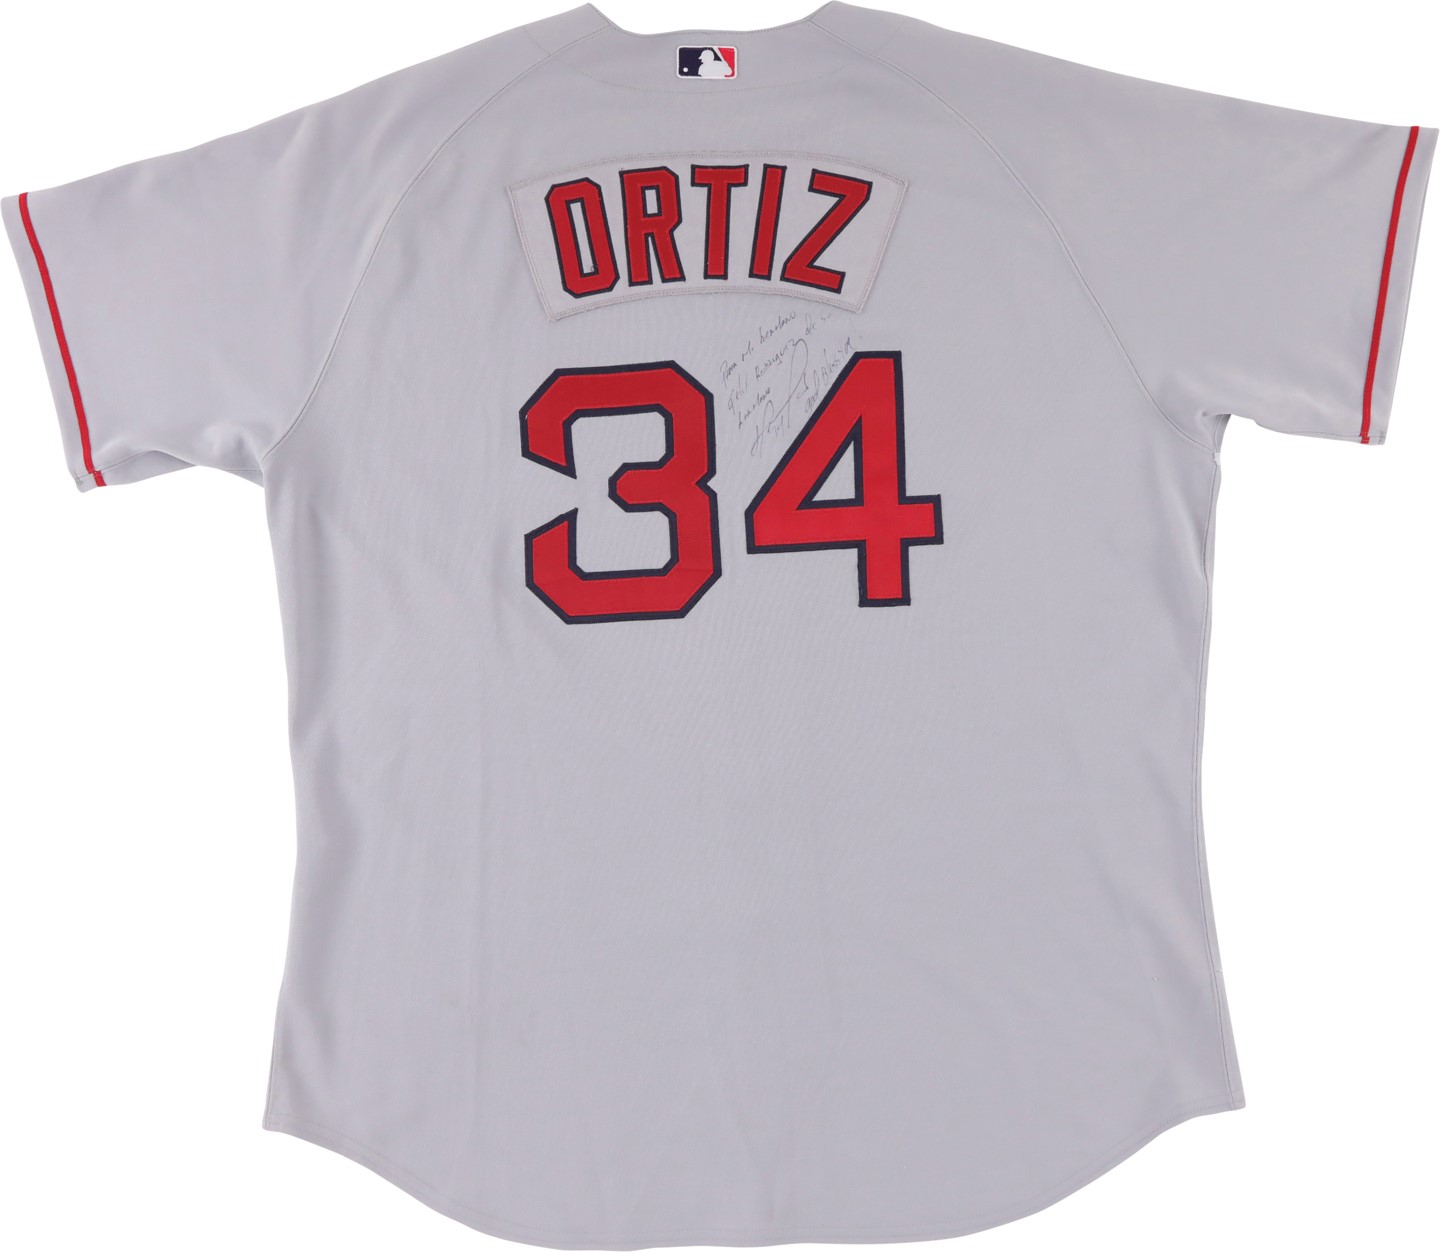 - 2006 David Ortiz Boston Red Sox Game Worn Jersey Inscribed to Pitcher Felix Hernandez (MEARS A10)